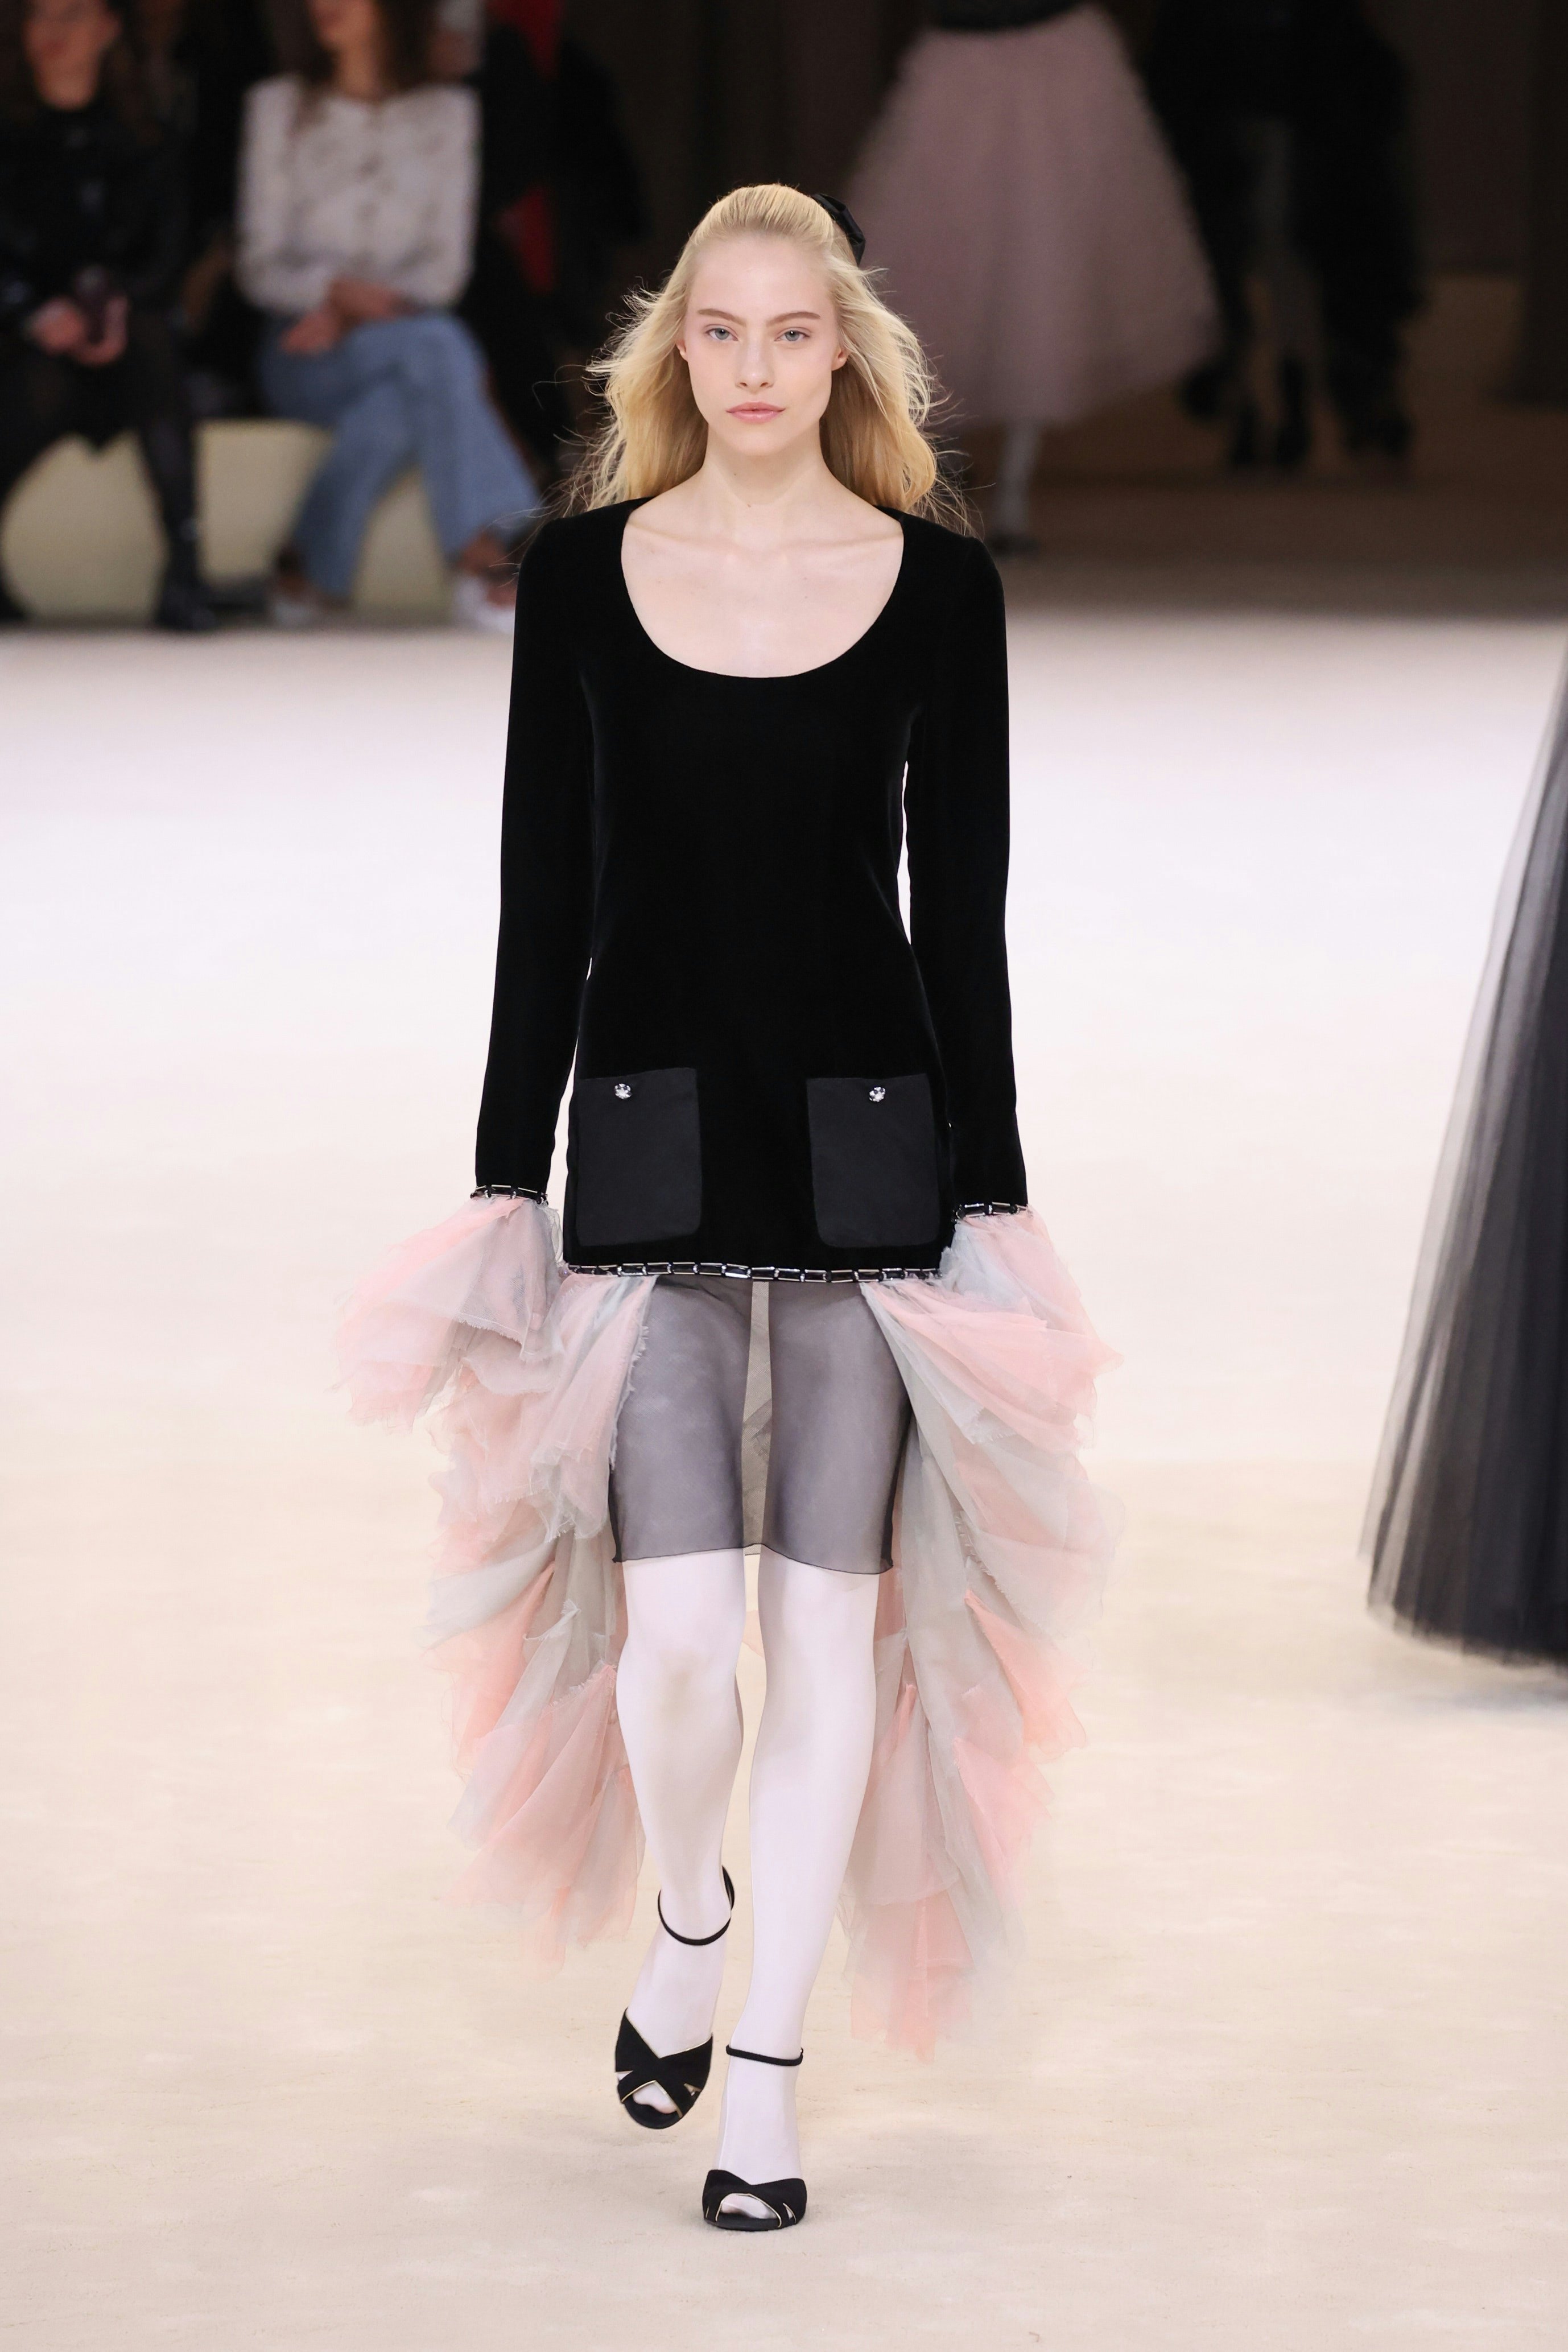 The Haute Couture Spring 2024 Trends Have The Drama You Crave